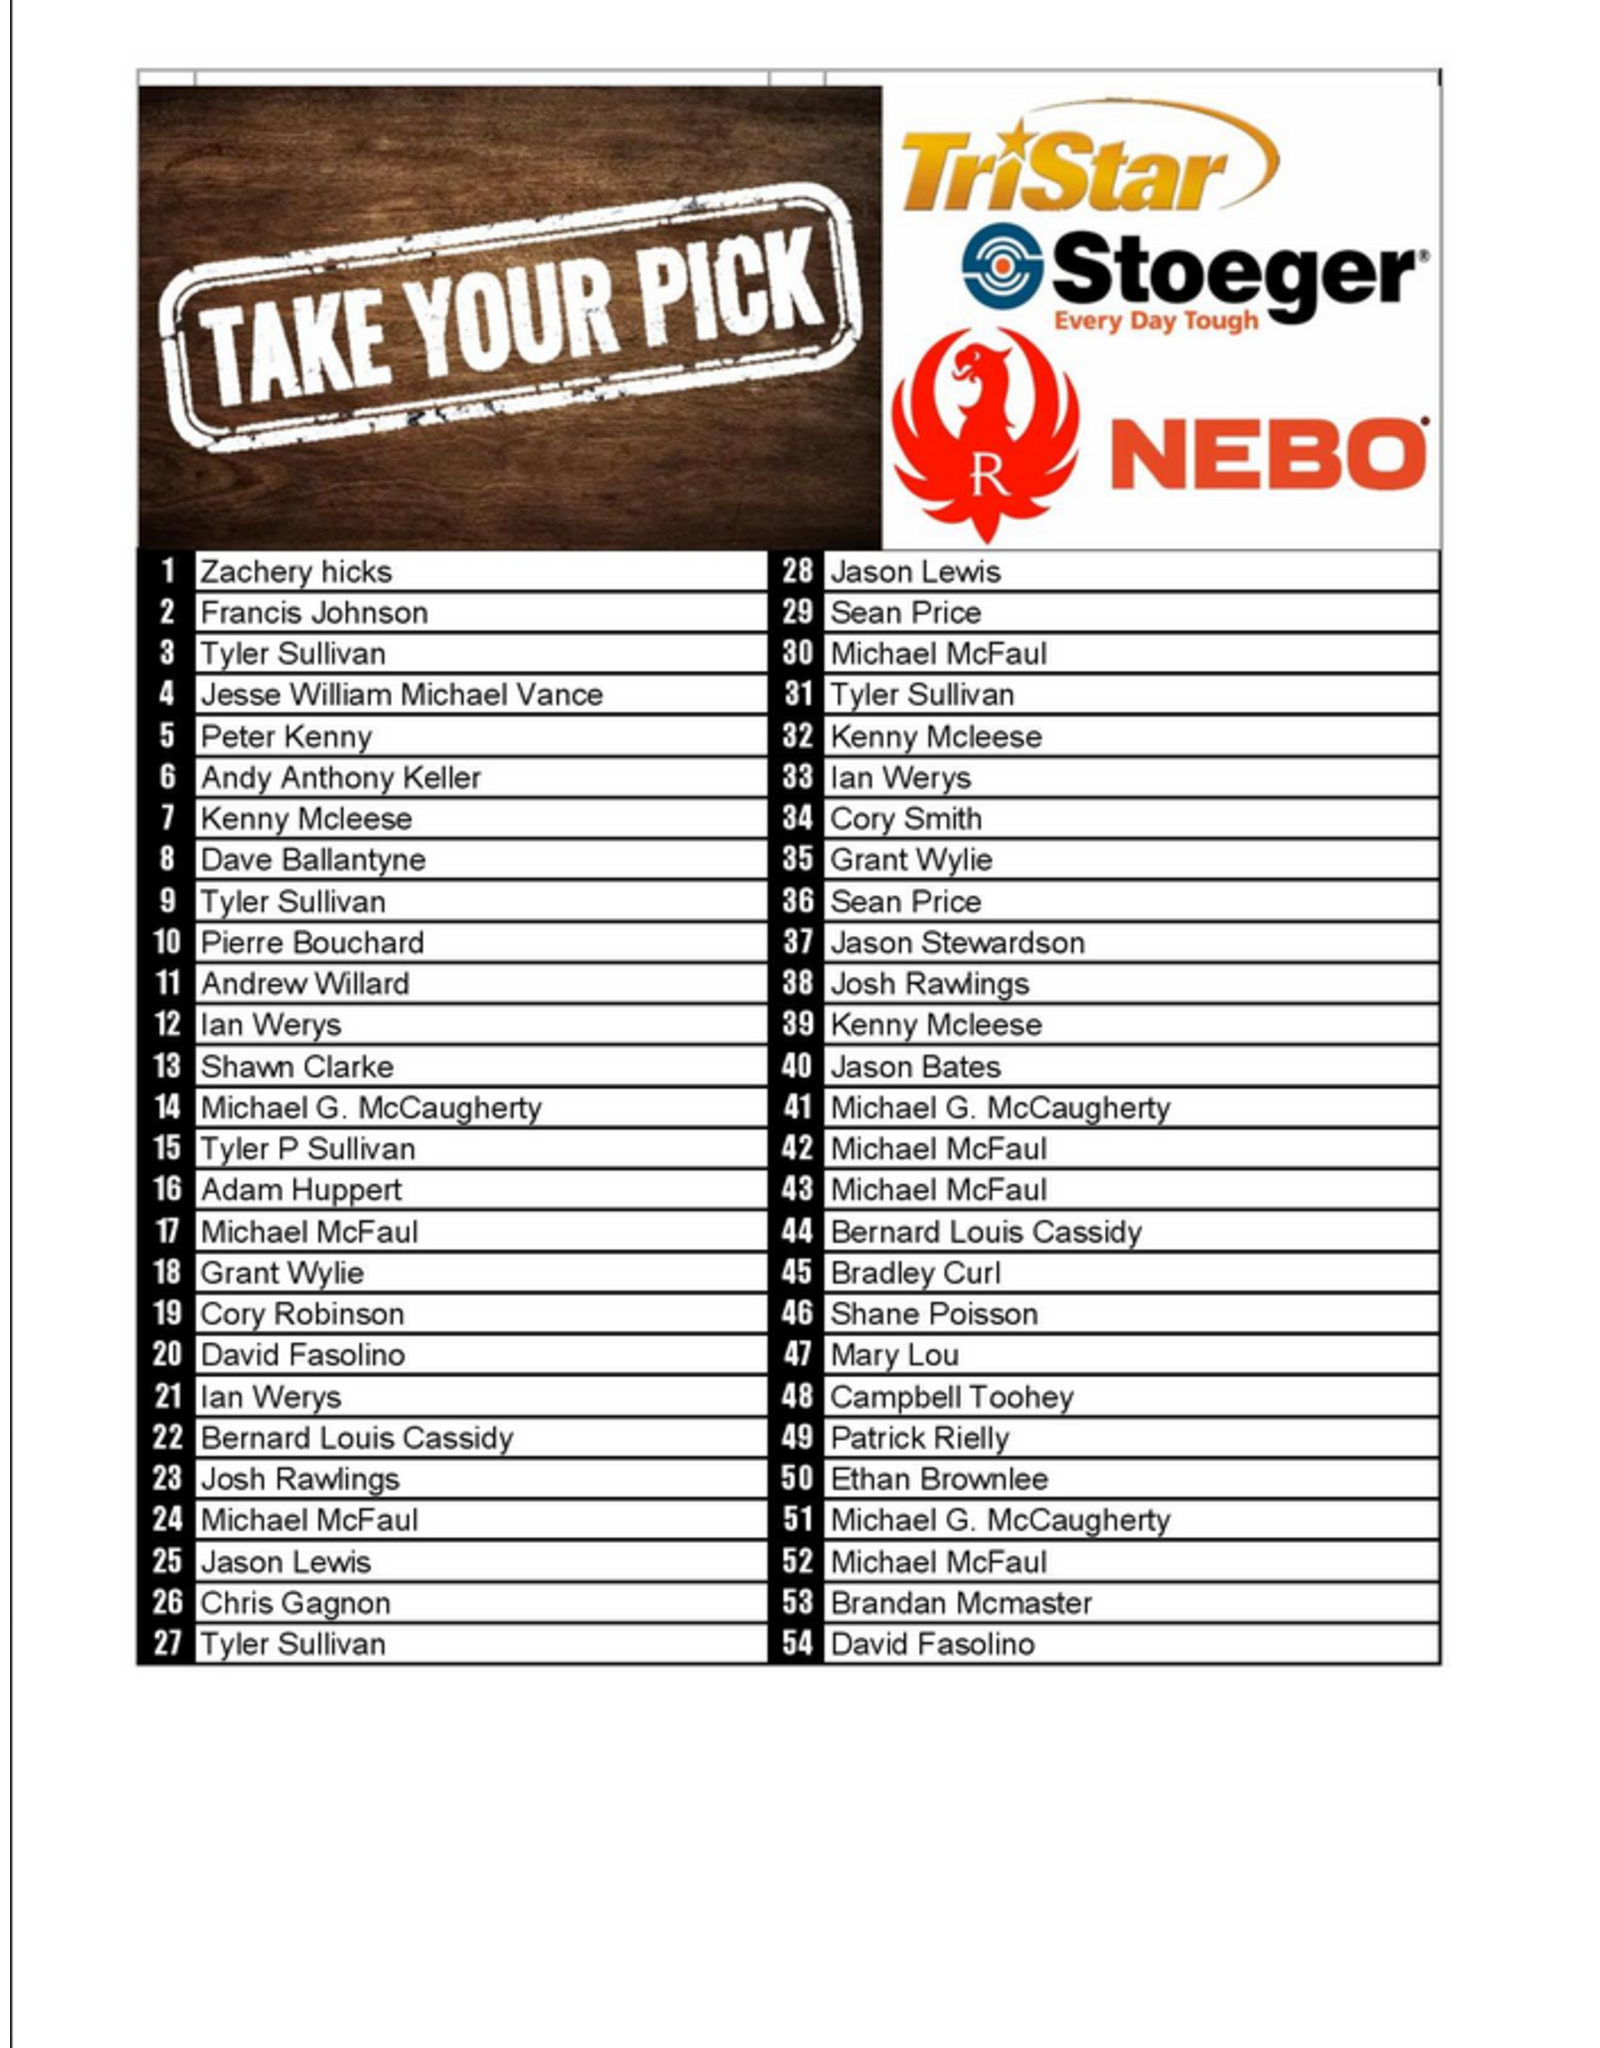 DRAW #1346 - Take Your Pick - Ruger, TriStar OR Stoeger +Nebo